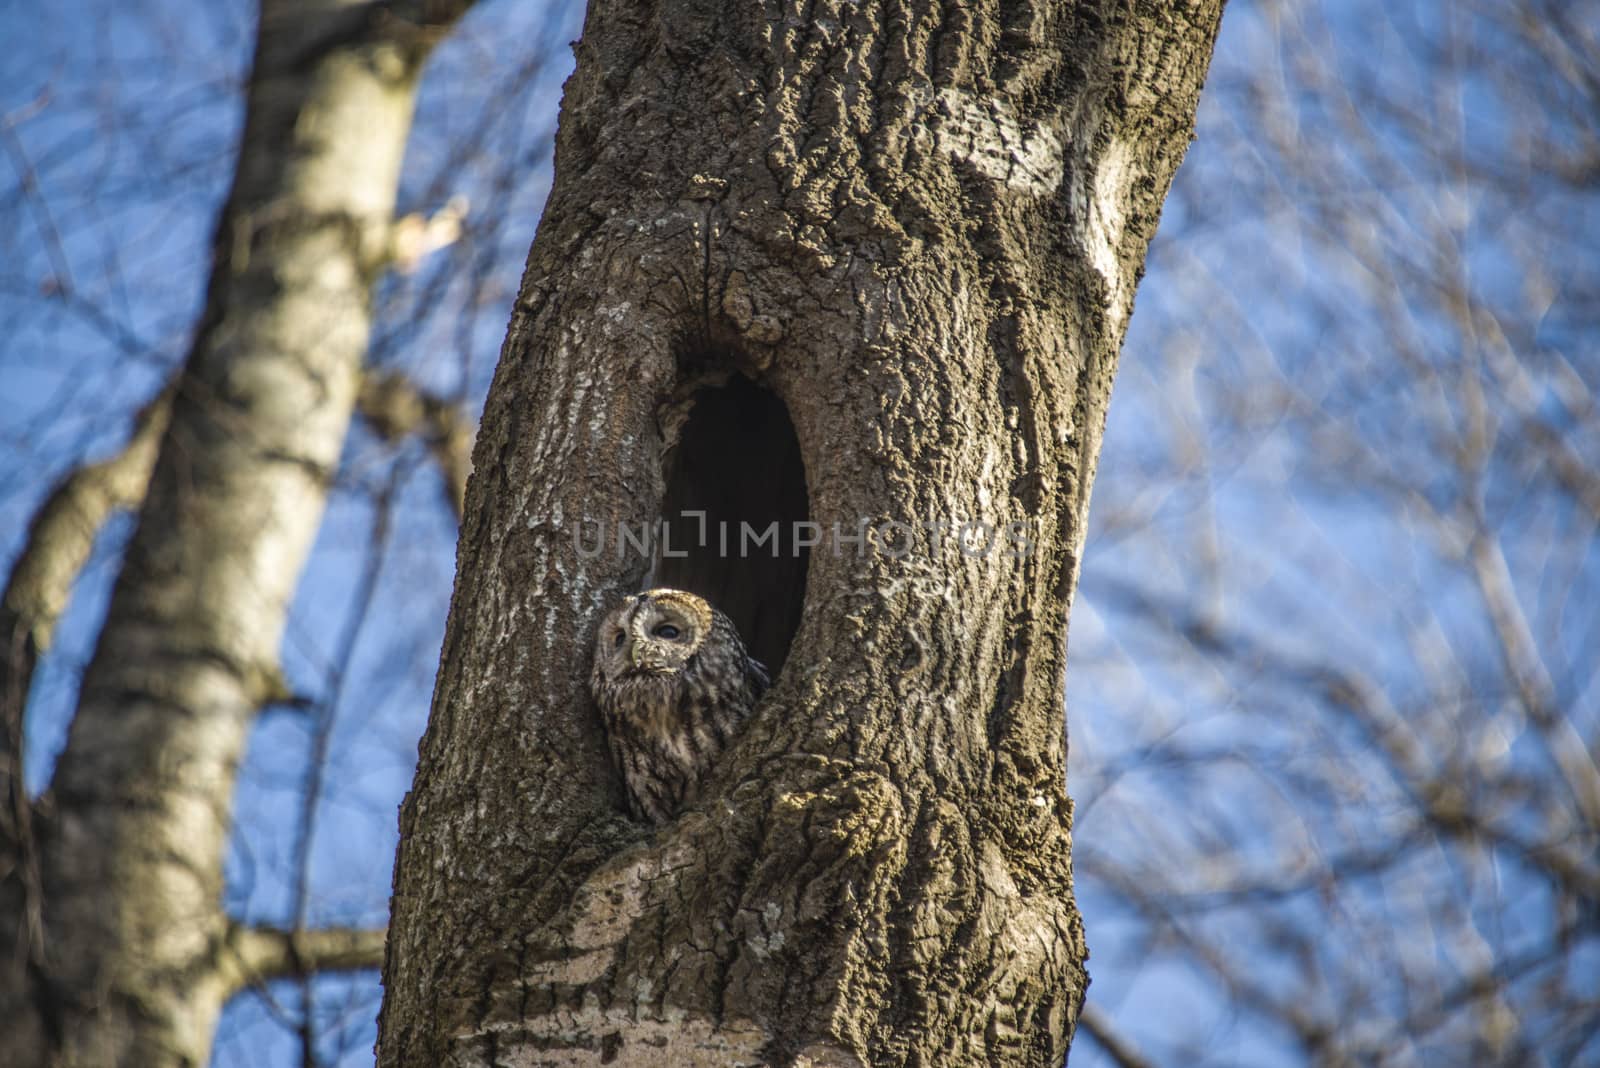 The image is shot in a older preserved deciduous forest  in Halden, Norway called Refne. The owl sits in a hole in the tree and have an overview of most of the forest. The image was shot one day in April 2013.